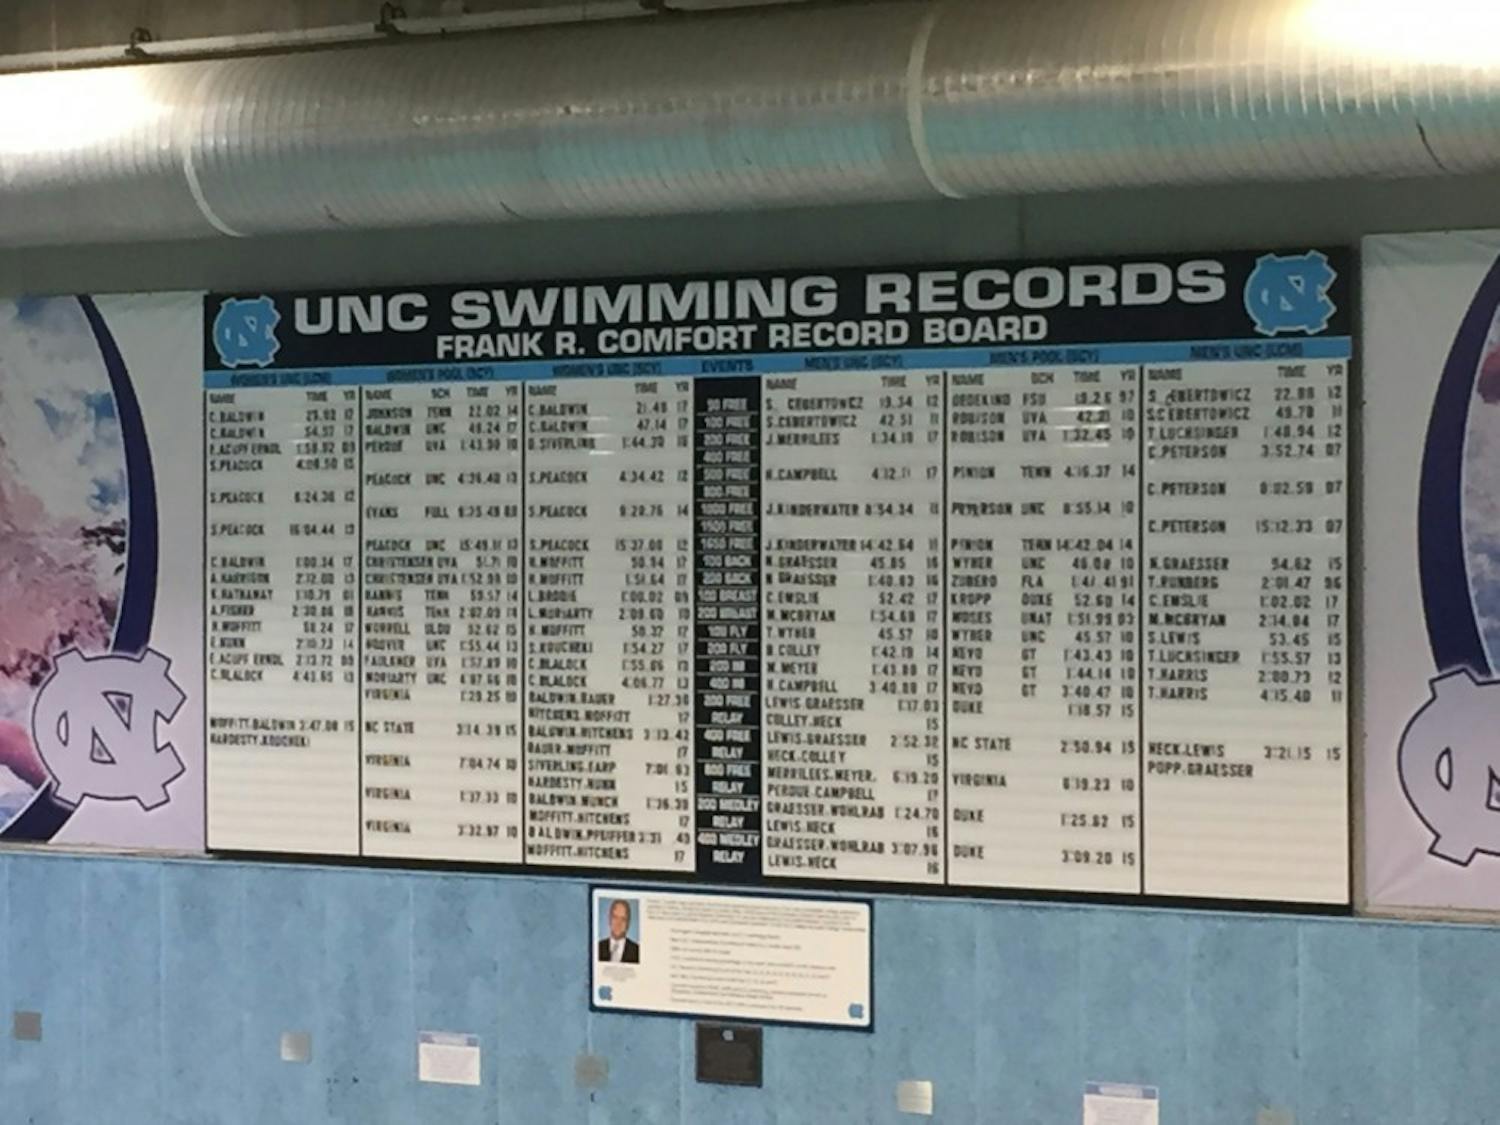 The UNC swim team displays its team records on the Frank R. Comfort Record Board, which hangs in Koury Natatorium.